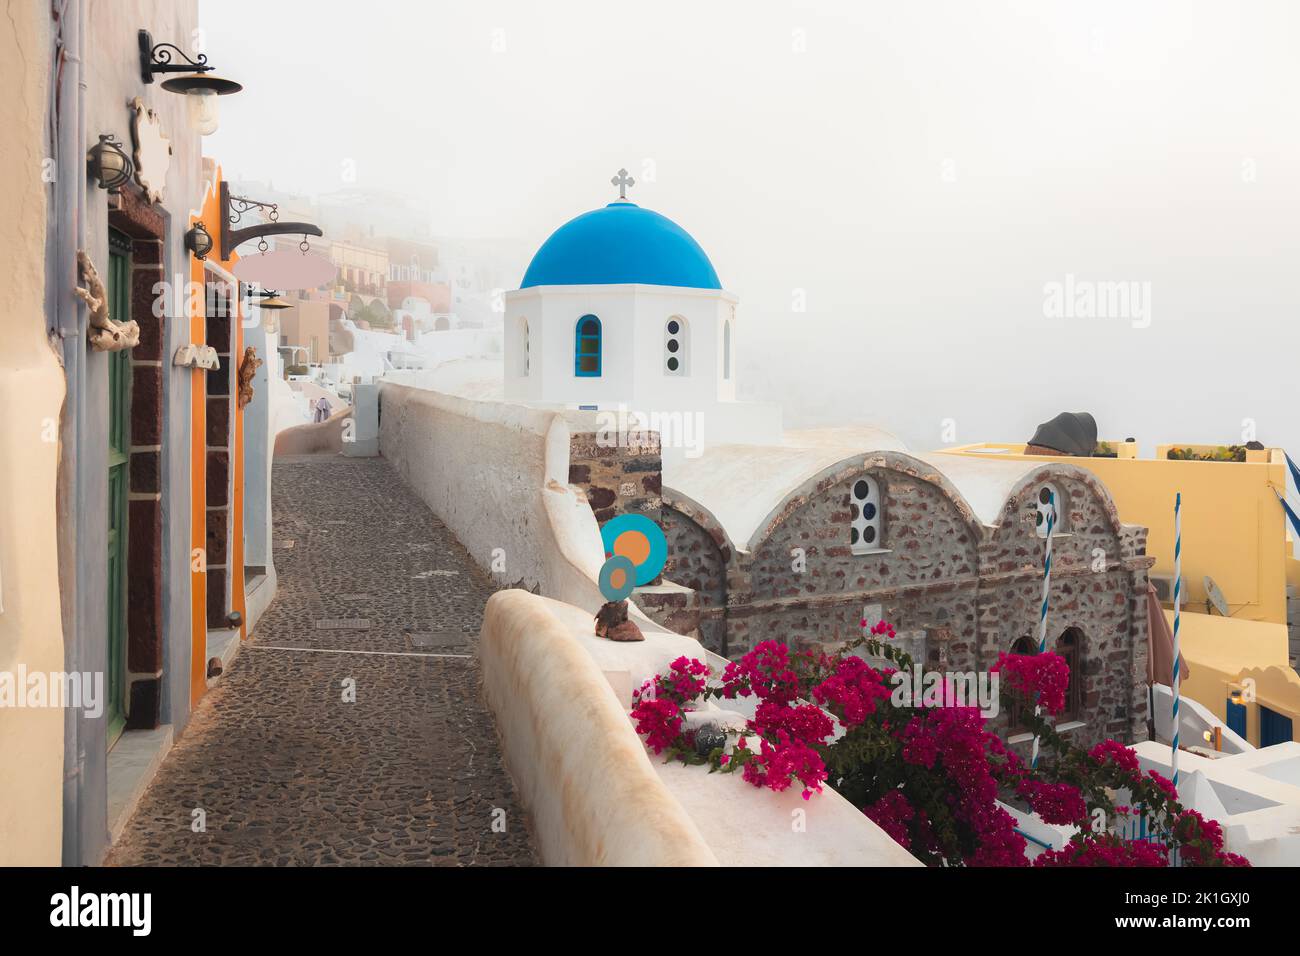 A foggy, misty morning along a quiet, quaint cobblestone lane alongside the traditional blue dome Greek Orthodox church Panagia Agion Panton in the co Stock Photo